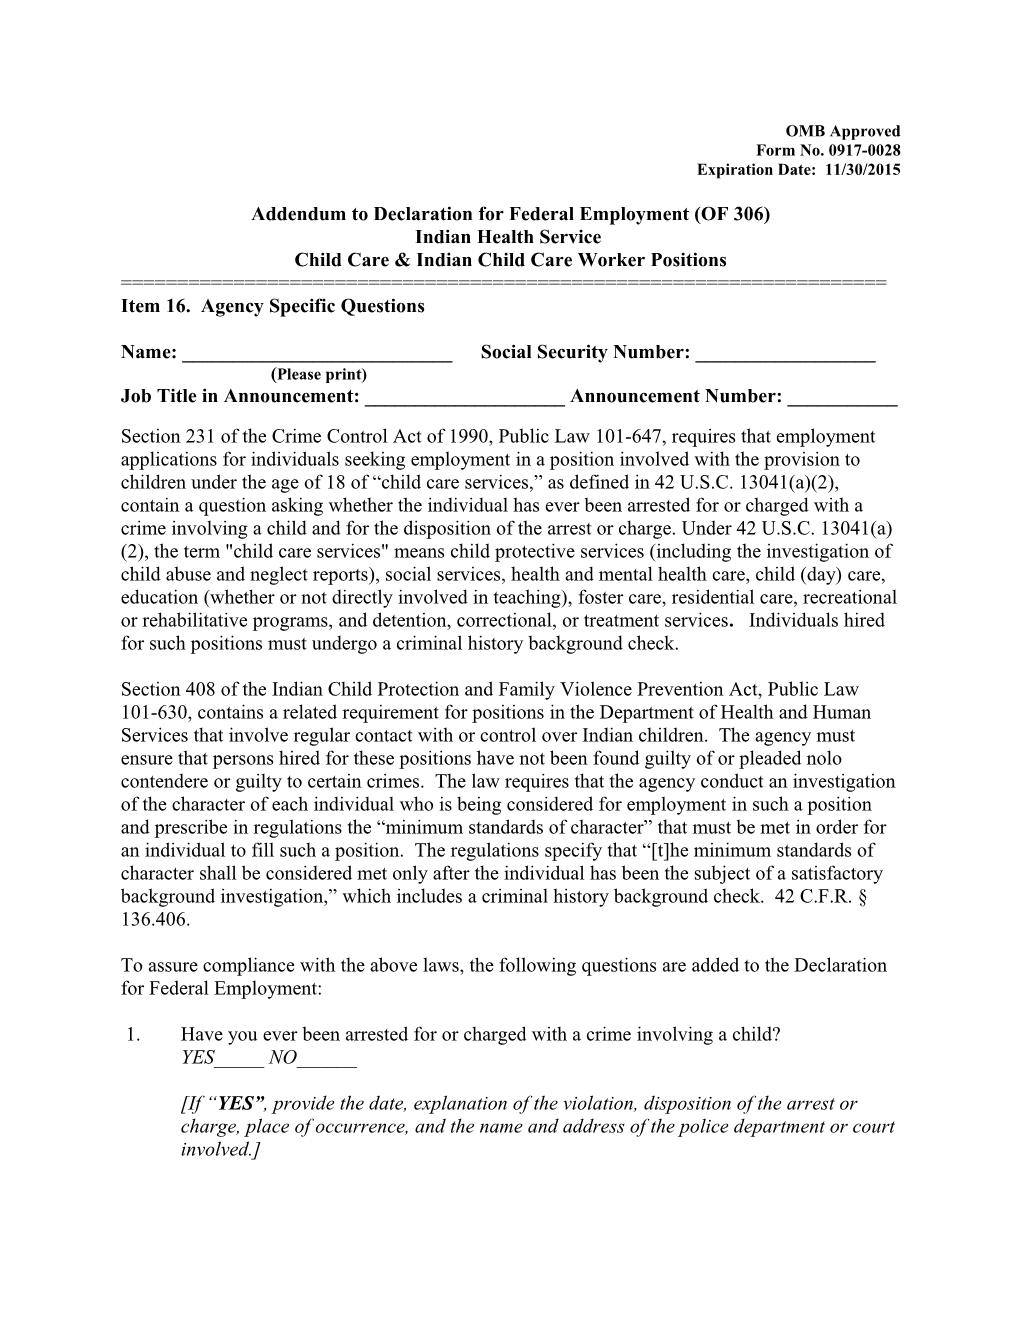 Addendum to Declaration for Federal Employment (OF 306) Indian Health Service Child Care